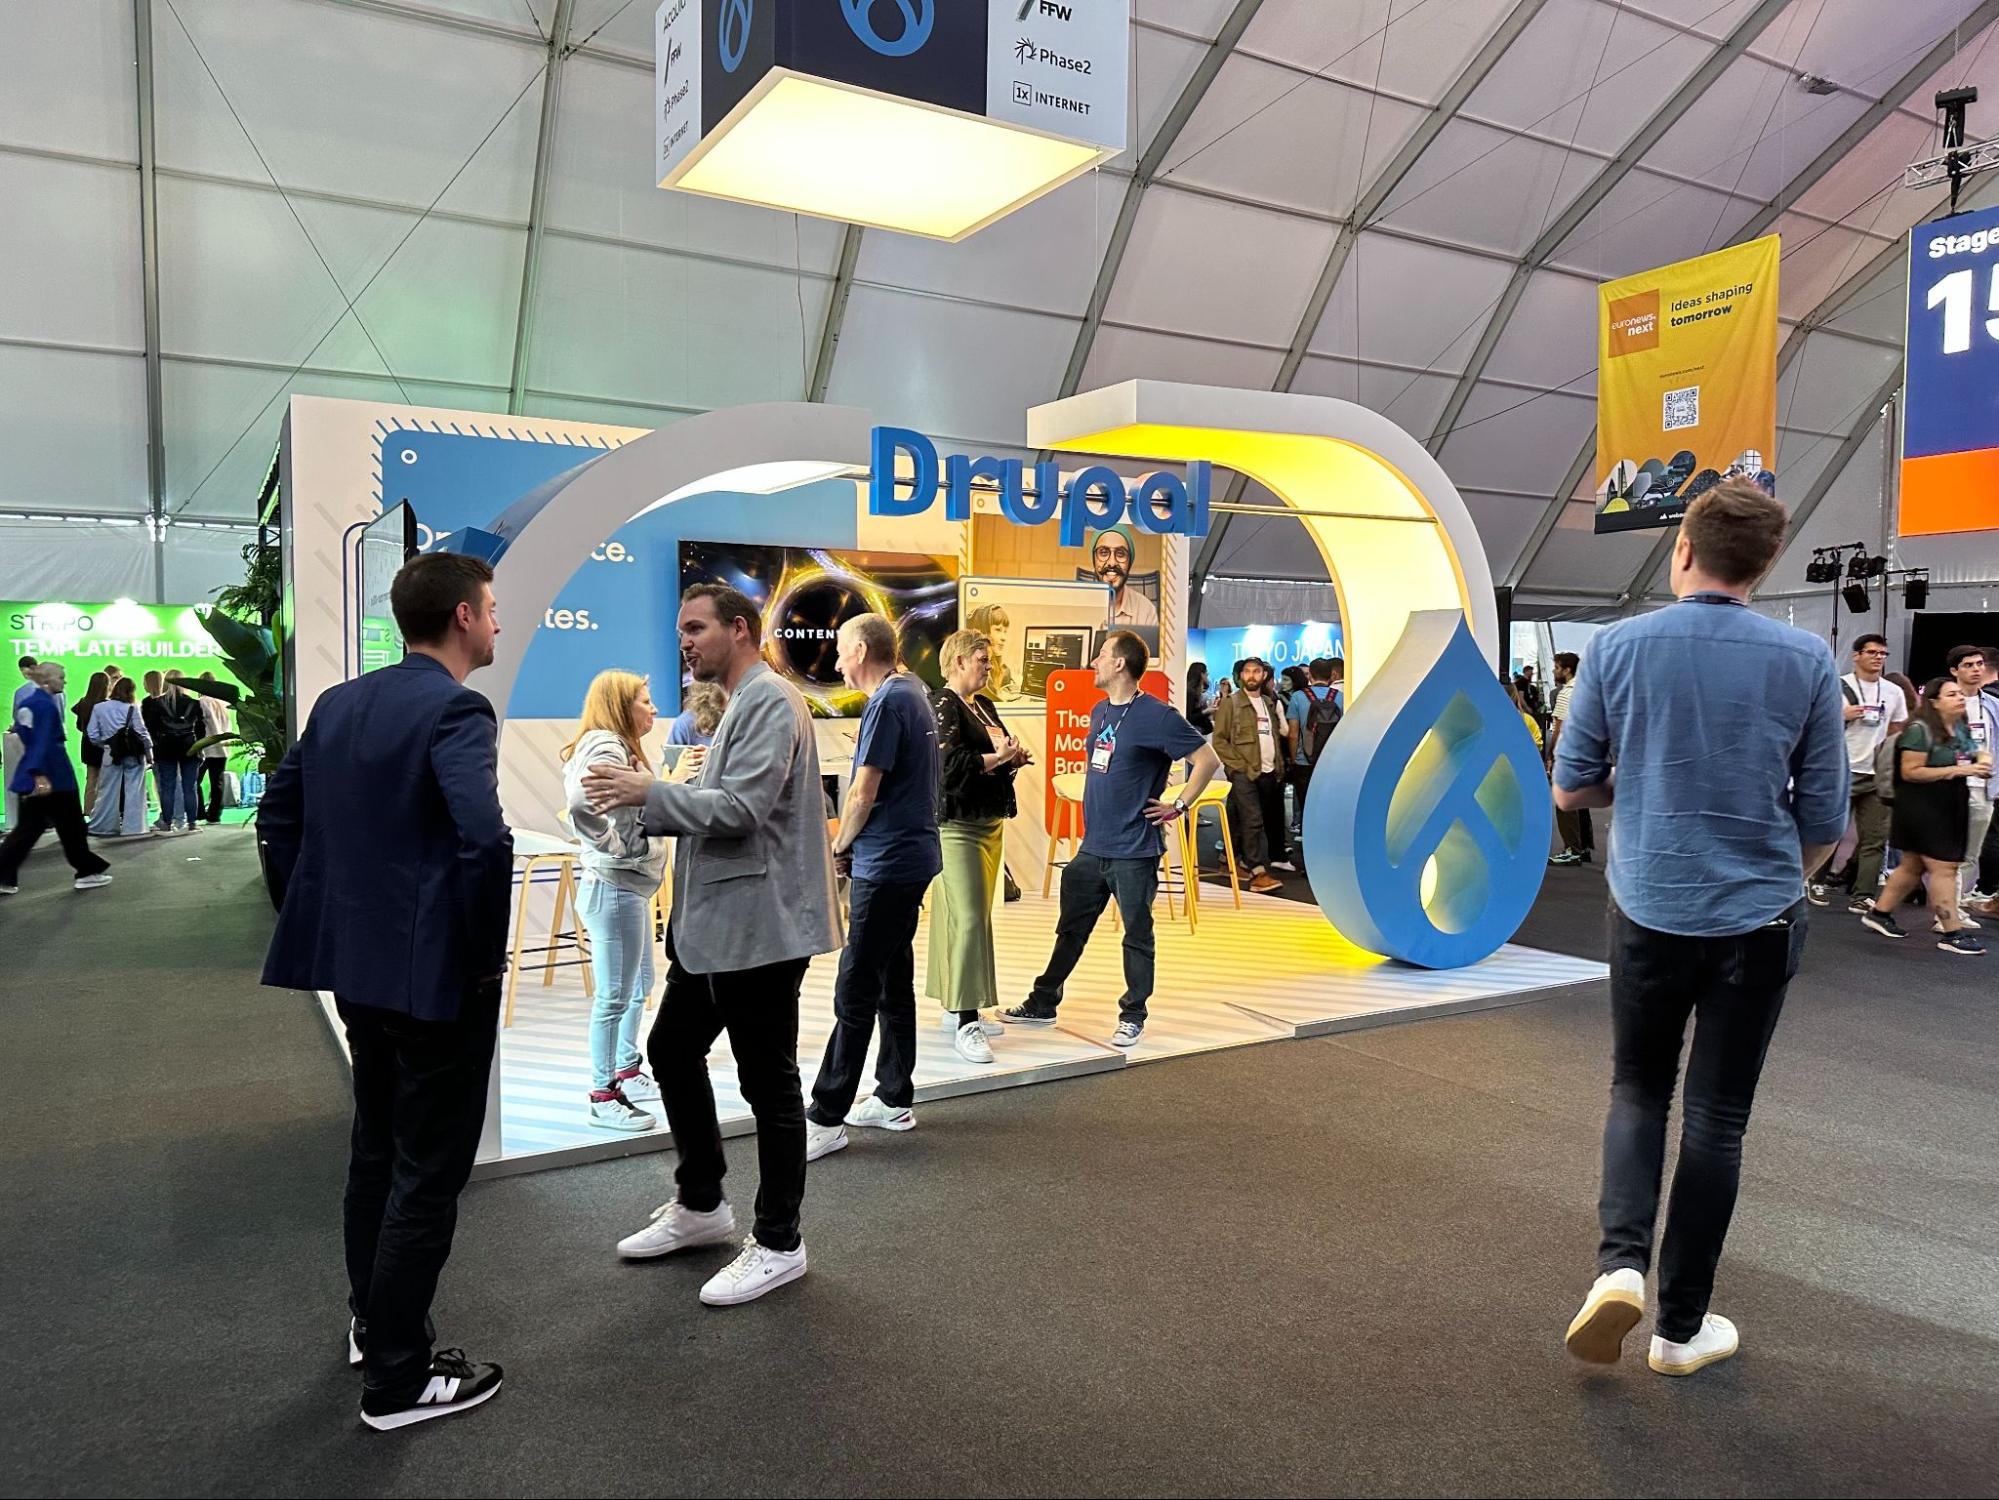 Photo of the Drupal booth